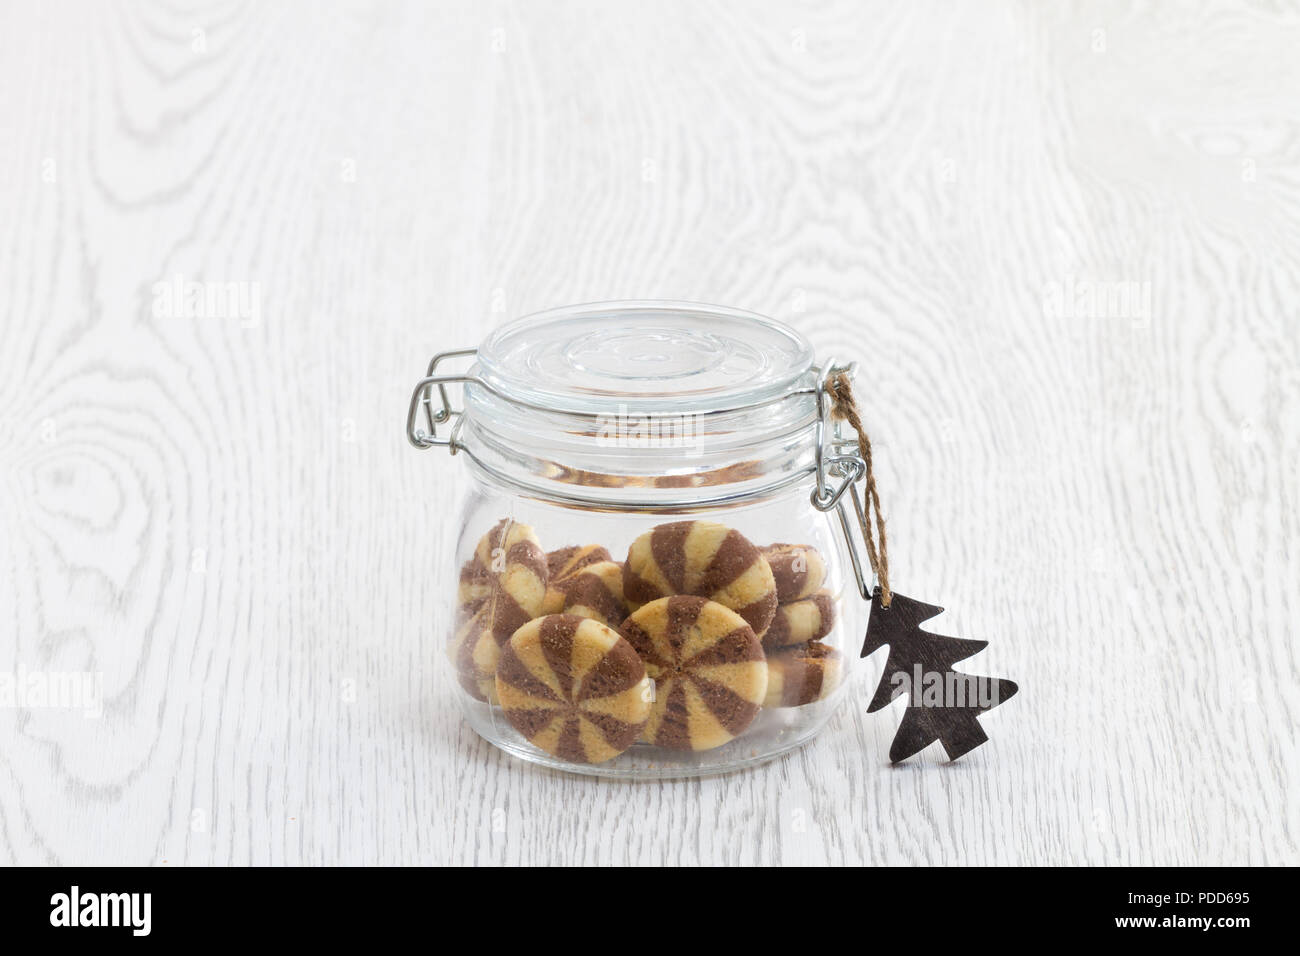 https://c8.alamy.com/comp/PDD695/transparent-retro-cookie-jar-on-white-kitchen-table-with-black-and-white-cookies-and-sezonda-feeling-PDD695.jpg